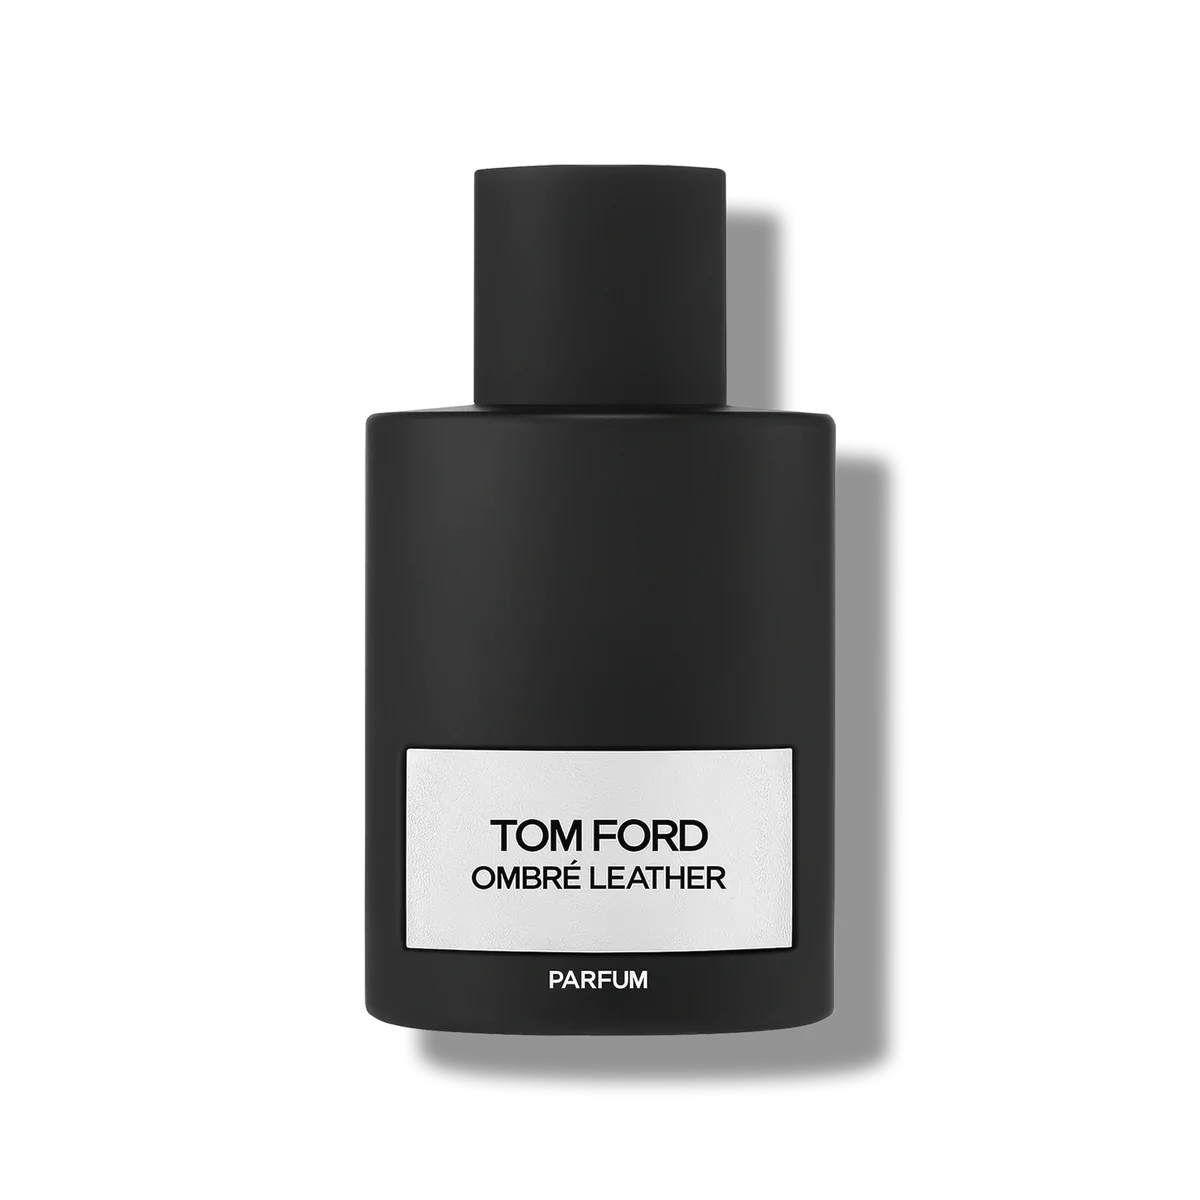 Sample/Decant Ombre Leather Parfum by Tom Ford is a Leather fragrance for women and men. Ombre Leather Parfum was launched in 2021.